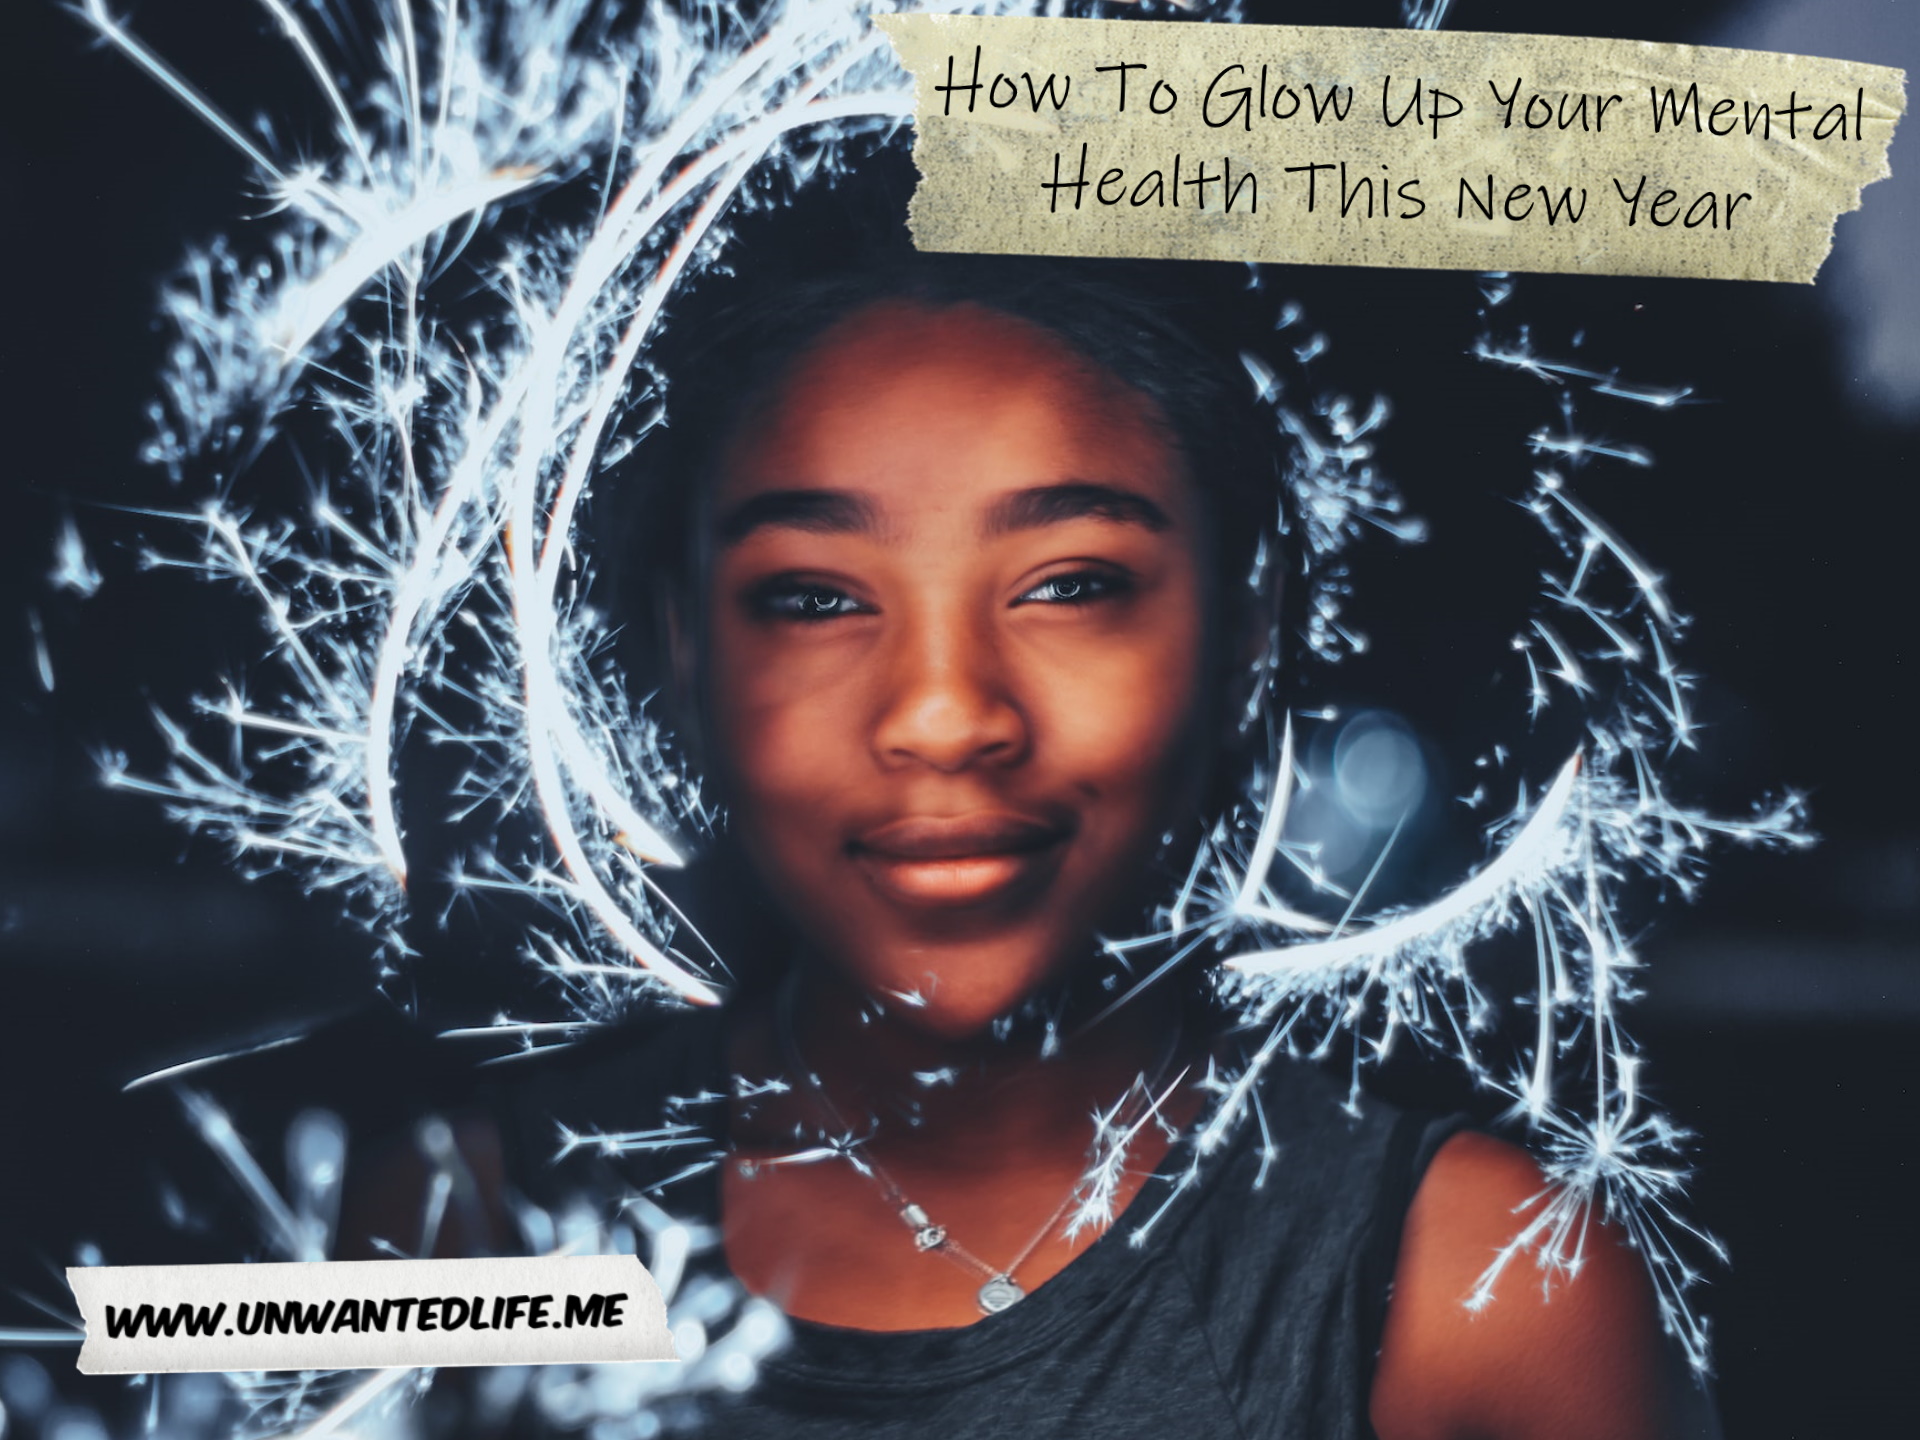 A photo of a Black woman outlined by a sparkler trace effect, to represent the topic of the article - How To Glow Up Your Mental Health This New Year